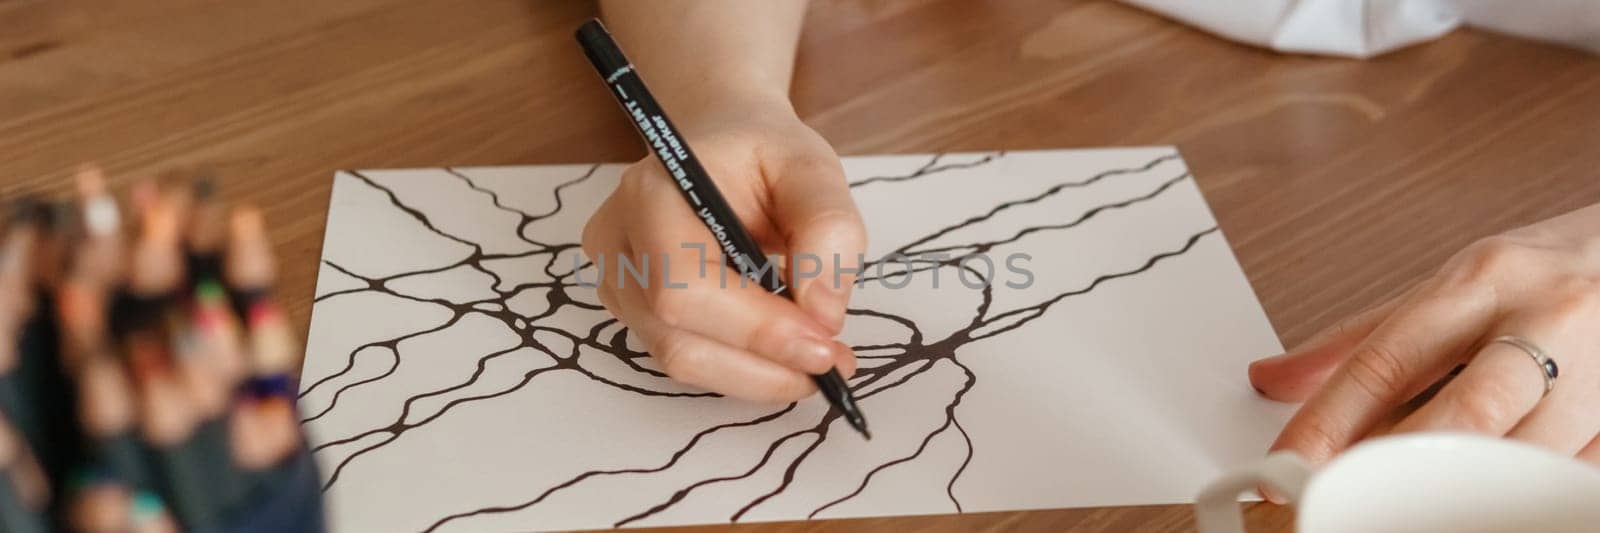 TVER, RUSSIA - FEBRUARY 25, 2023: Woman draws neurographics at table at a psychological session, neurographic pencil drawing to remove restrictions, art therapy.